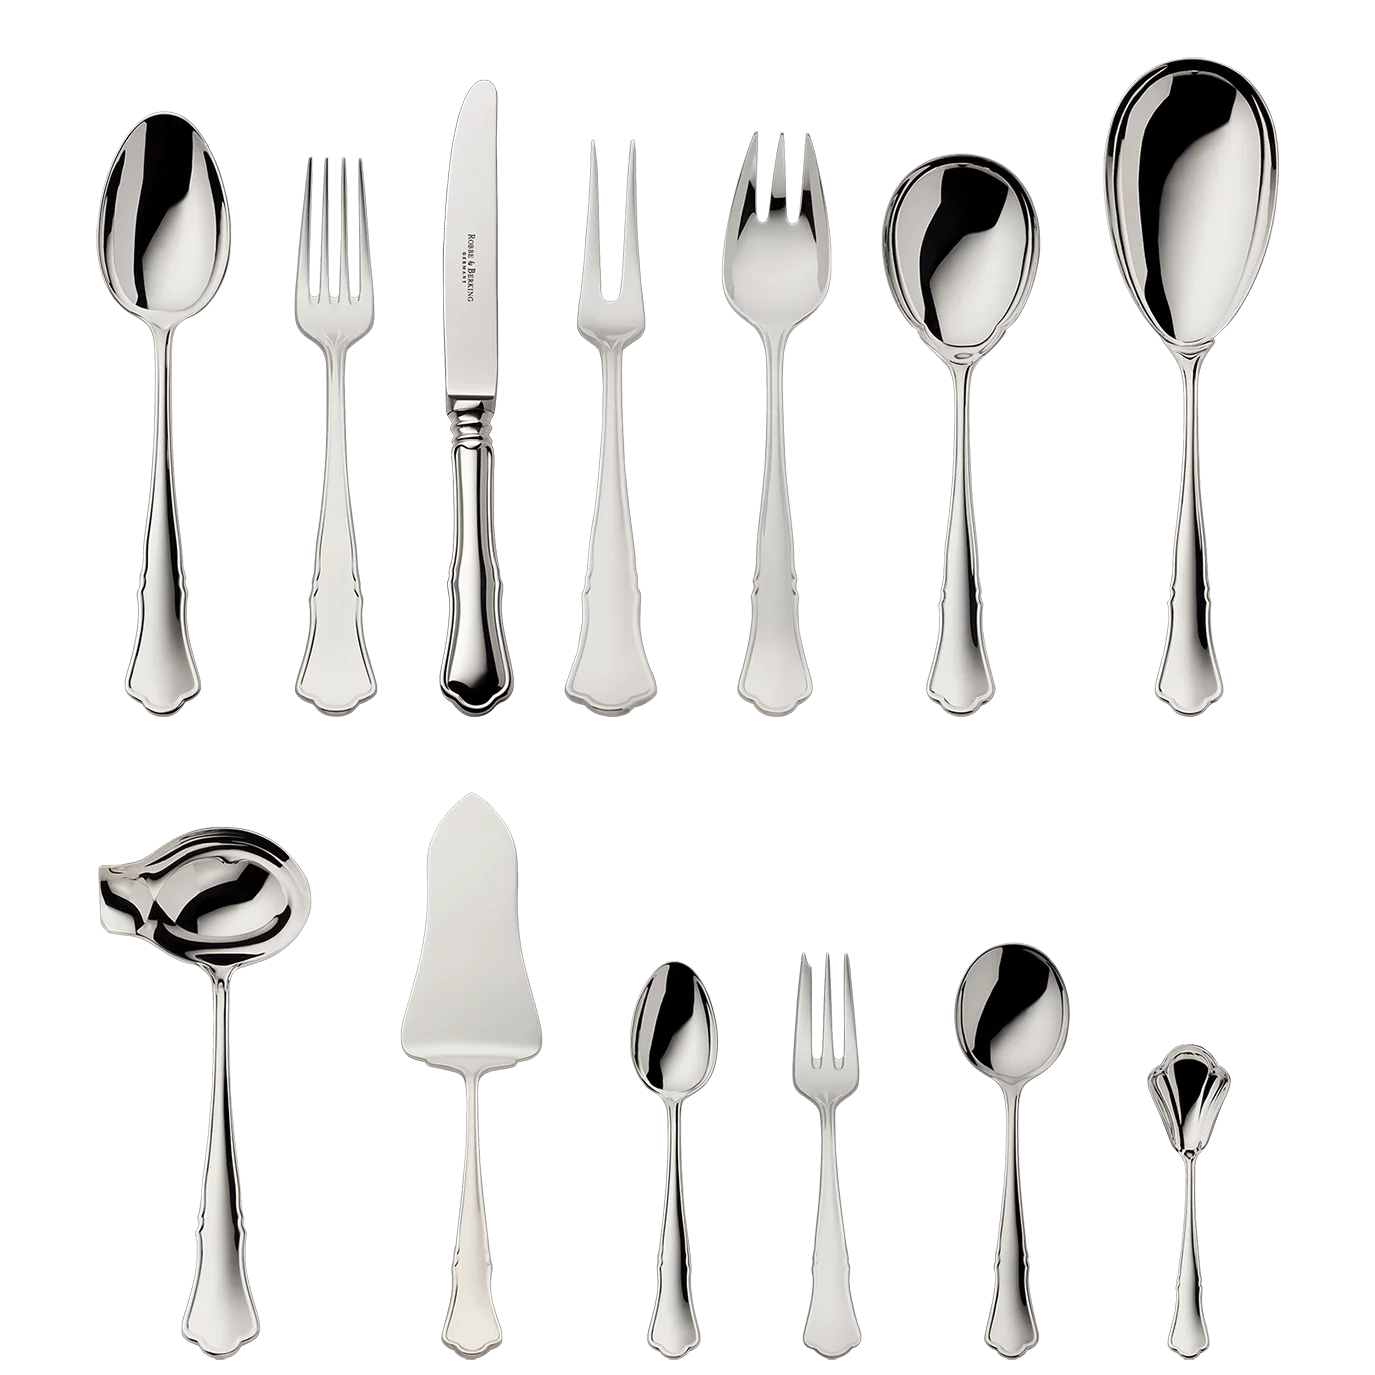 Alt-Chippendale 39-piece set (150g massive silverplated)